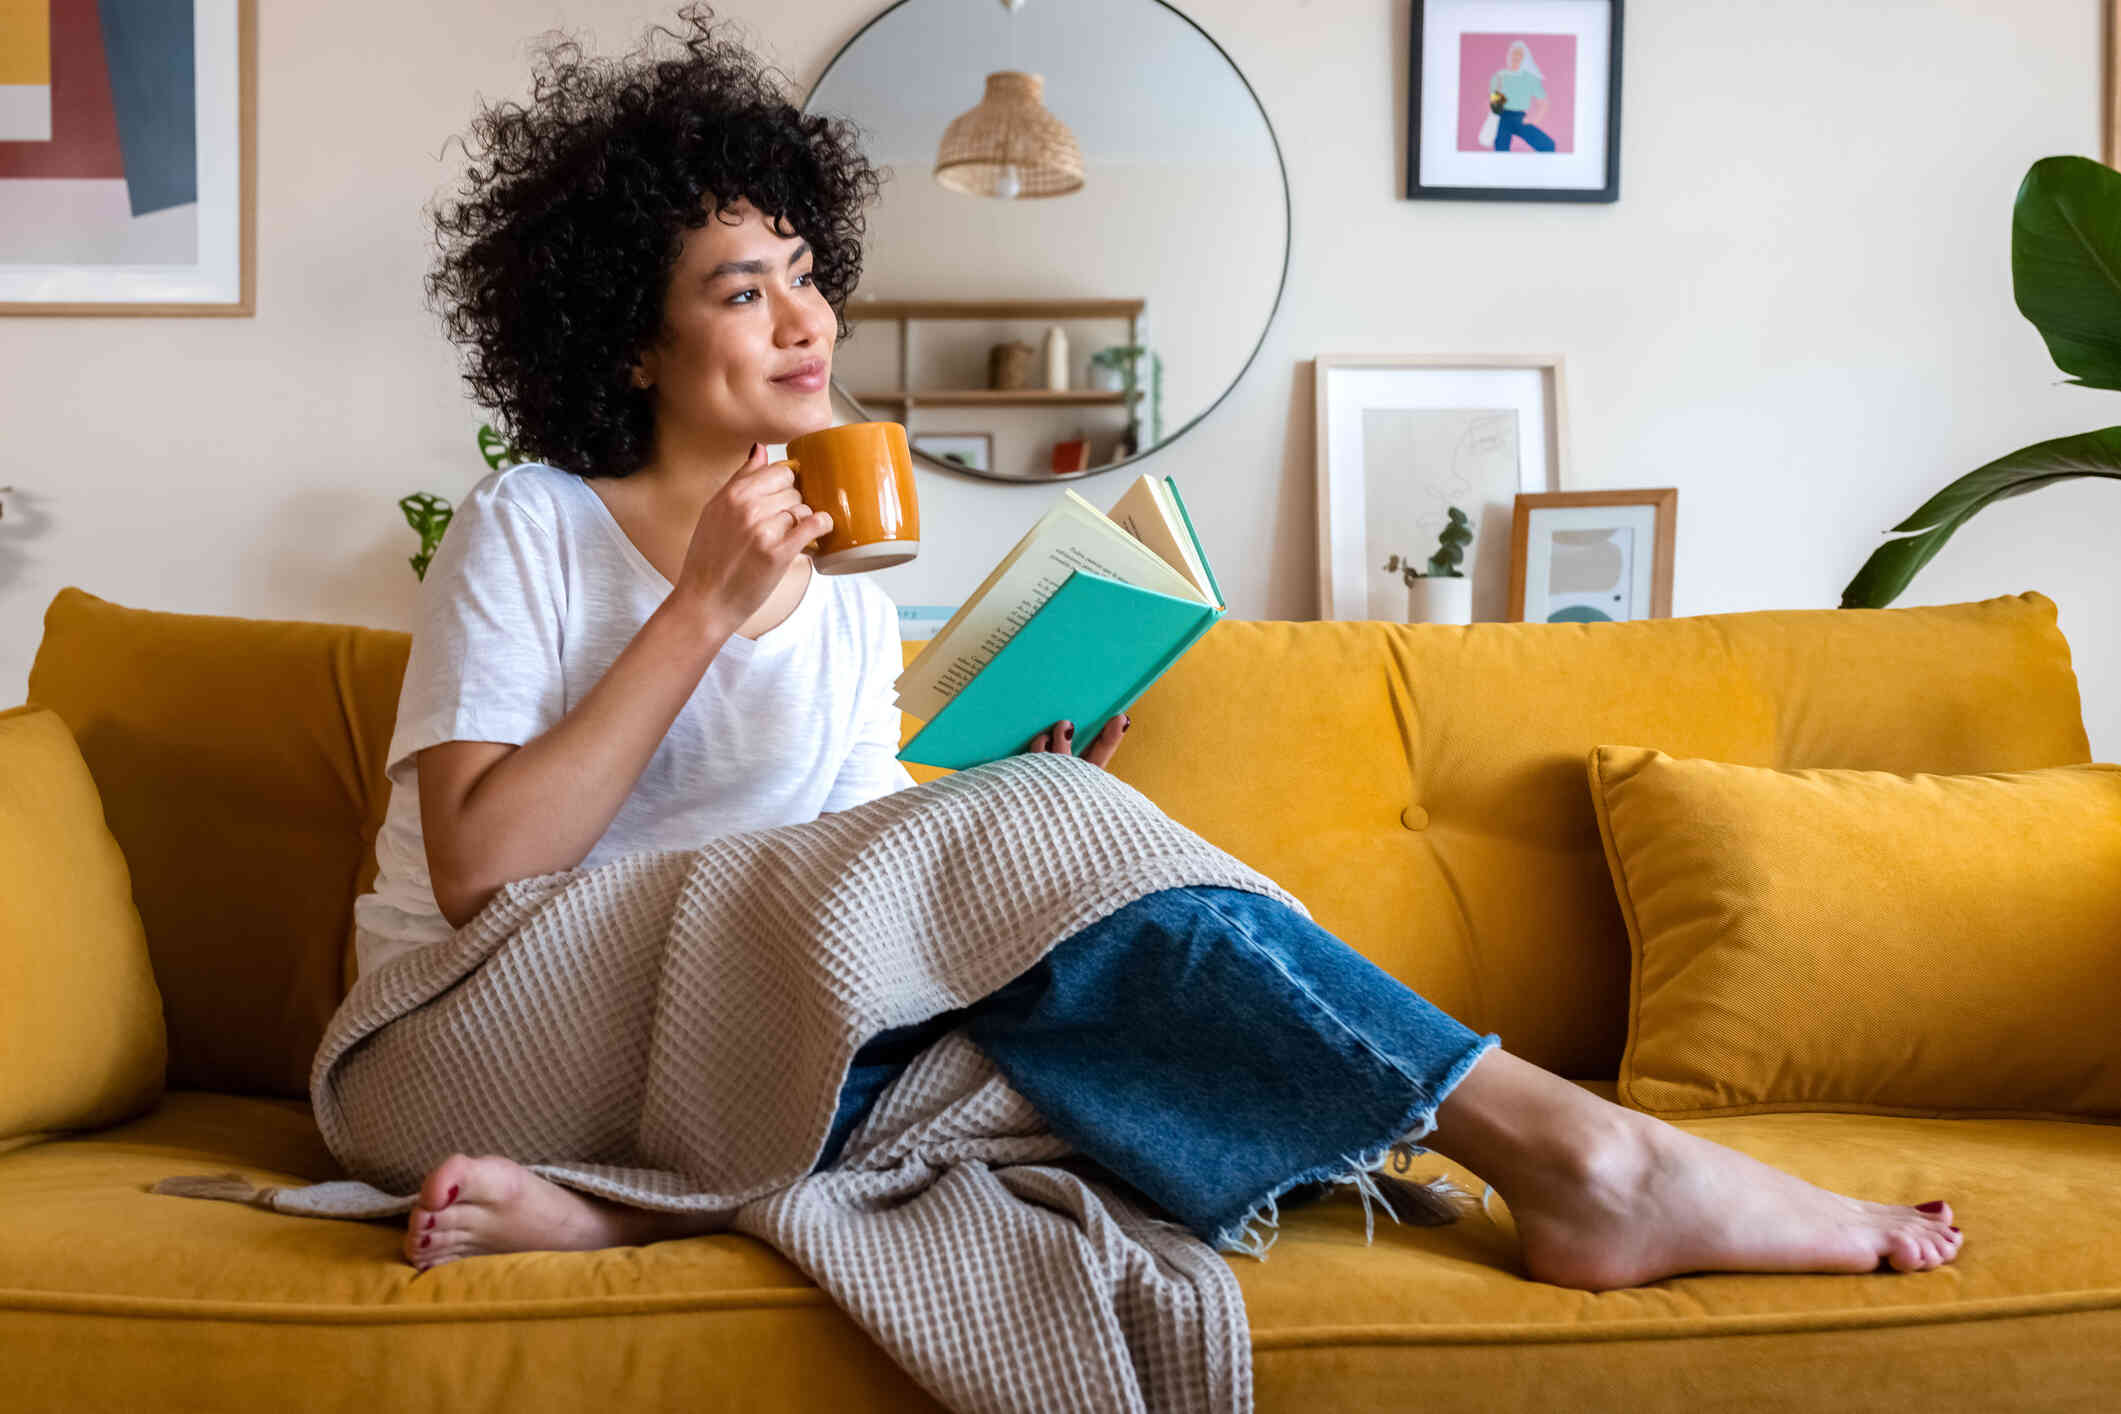 A woman sits casually on her couch while with a blanket over her lap while holding a book and a cup of coffee while glancing off with a smile.